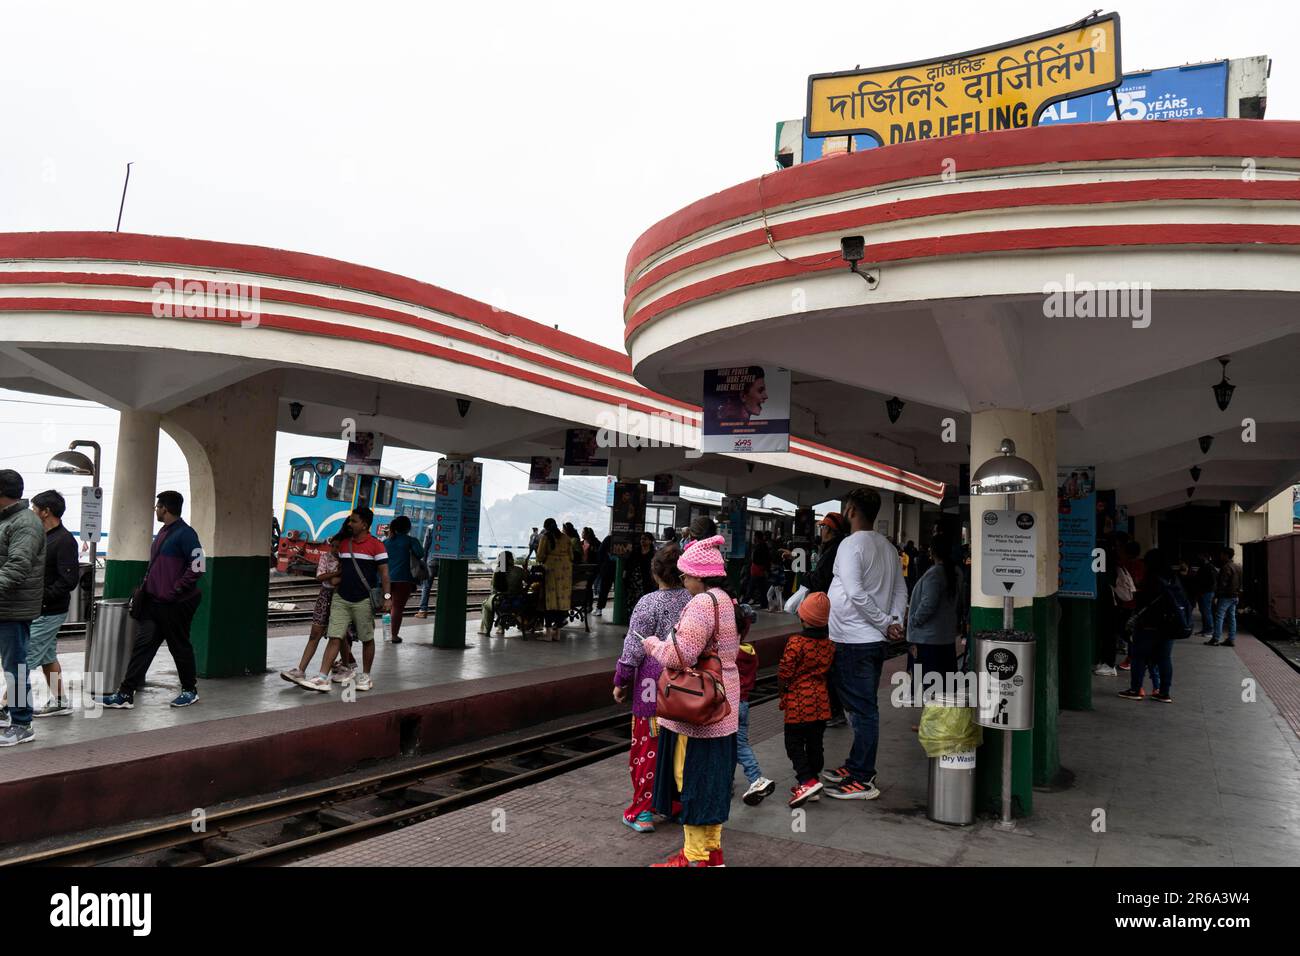 DARJEELING, INDIA, MAY 25: Tourists wait for a toy train of Darjeeling Himalayan Railway (DHR) at Darjeeling Railway station, on May 25, 2023 in Stock Photo